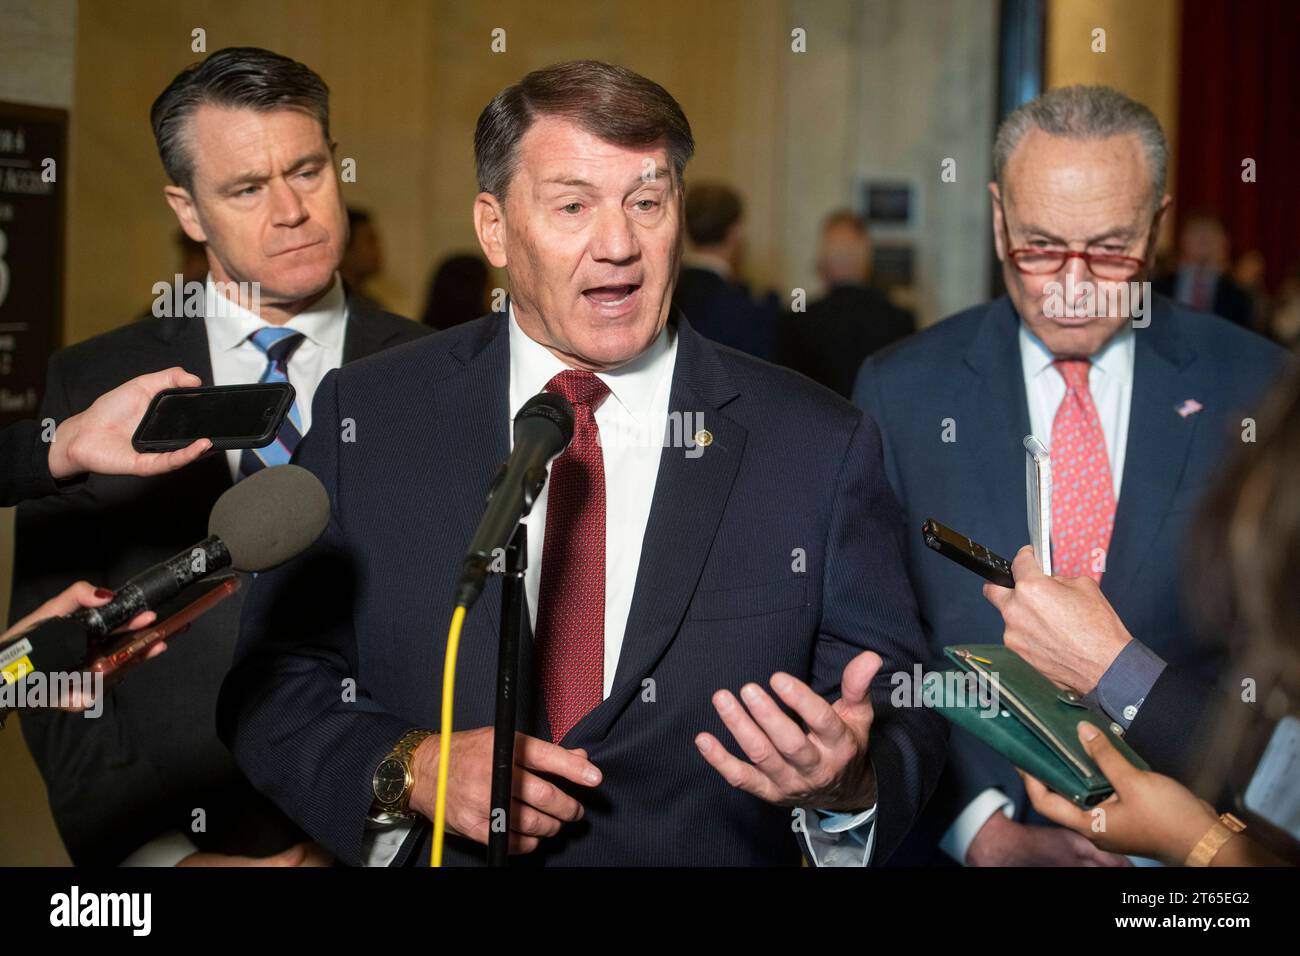 United States Senator Mike Rounds Republican of South Dakota, center, is joined by United States Senator Todd Young Republican of Indiana, left, and United States Senate Majority Leader Chuck Schumer Democrat of New York, right, for a press briefing in between panels of the Senate bipartisan AI Insight Forums in the Russell Senate Office Building in Washington, DC, Wednesday, November 8, 2023. The AI Insight Forums seek to bring together AI stakeholders to supercharge the Congressional process to develop bipartisan artificial intelligence legislation. The Forums have focused on capitalizing on Stock Photo